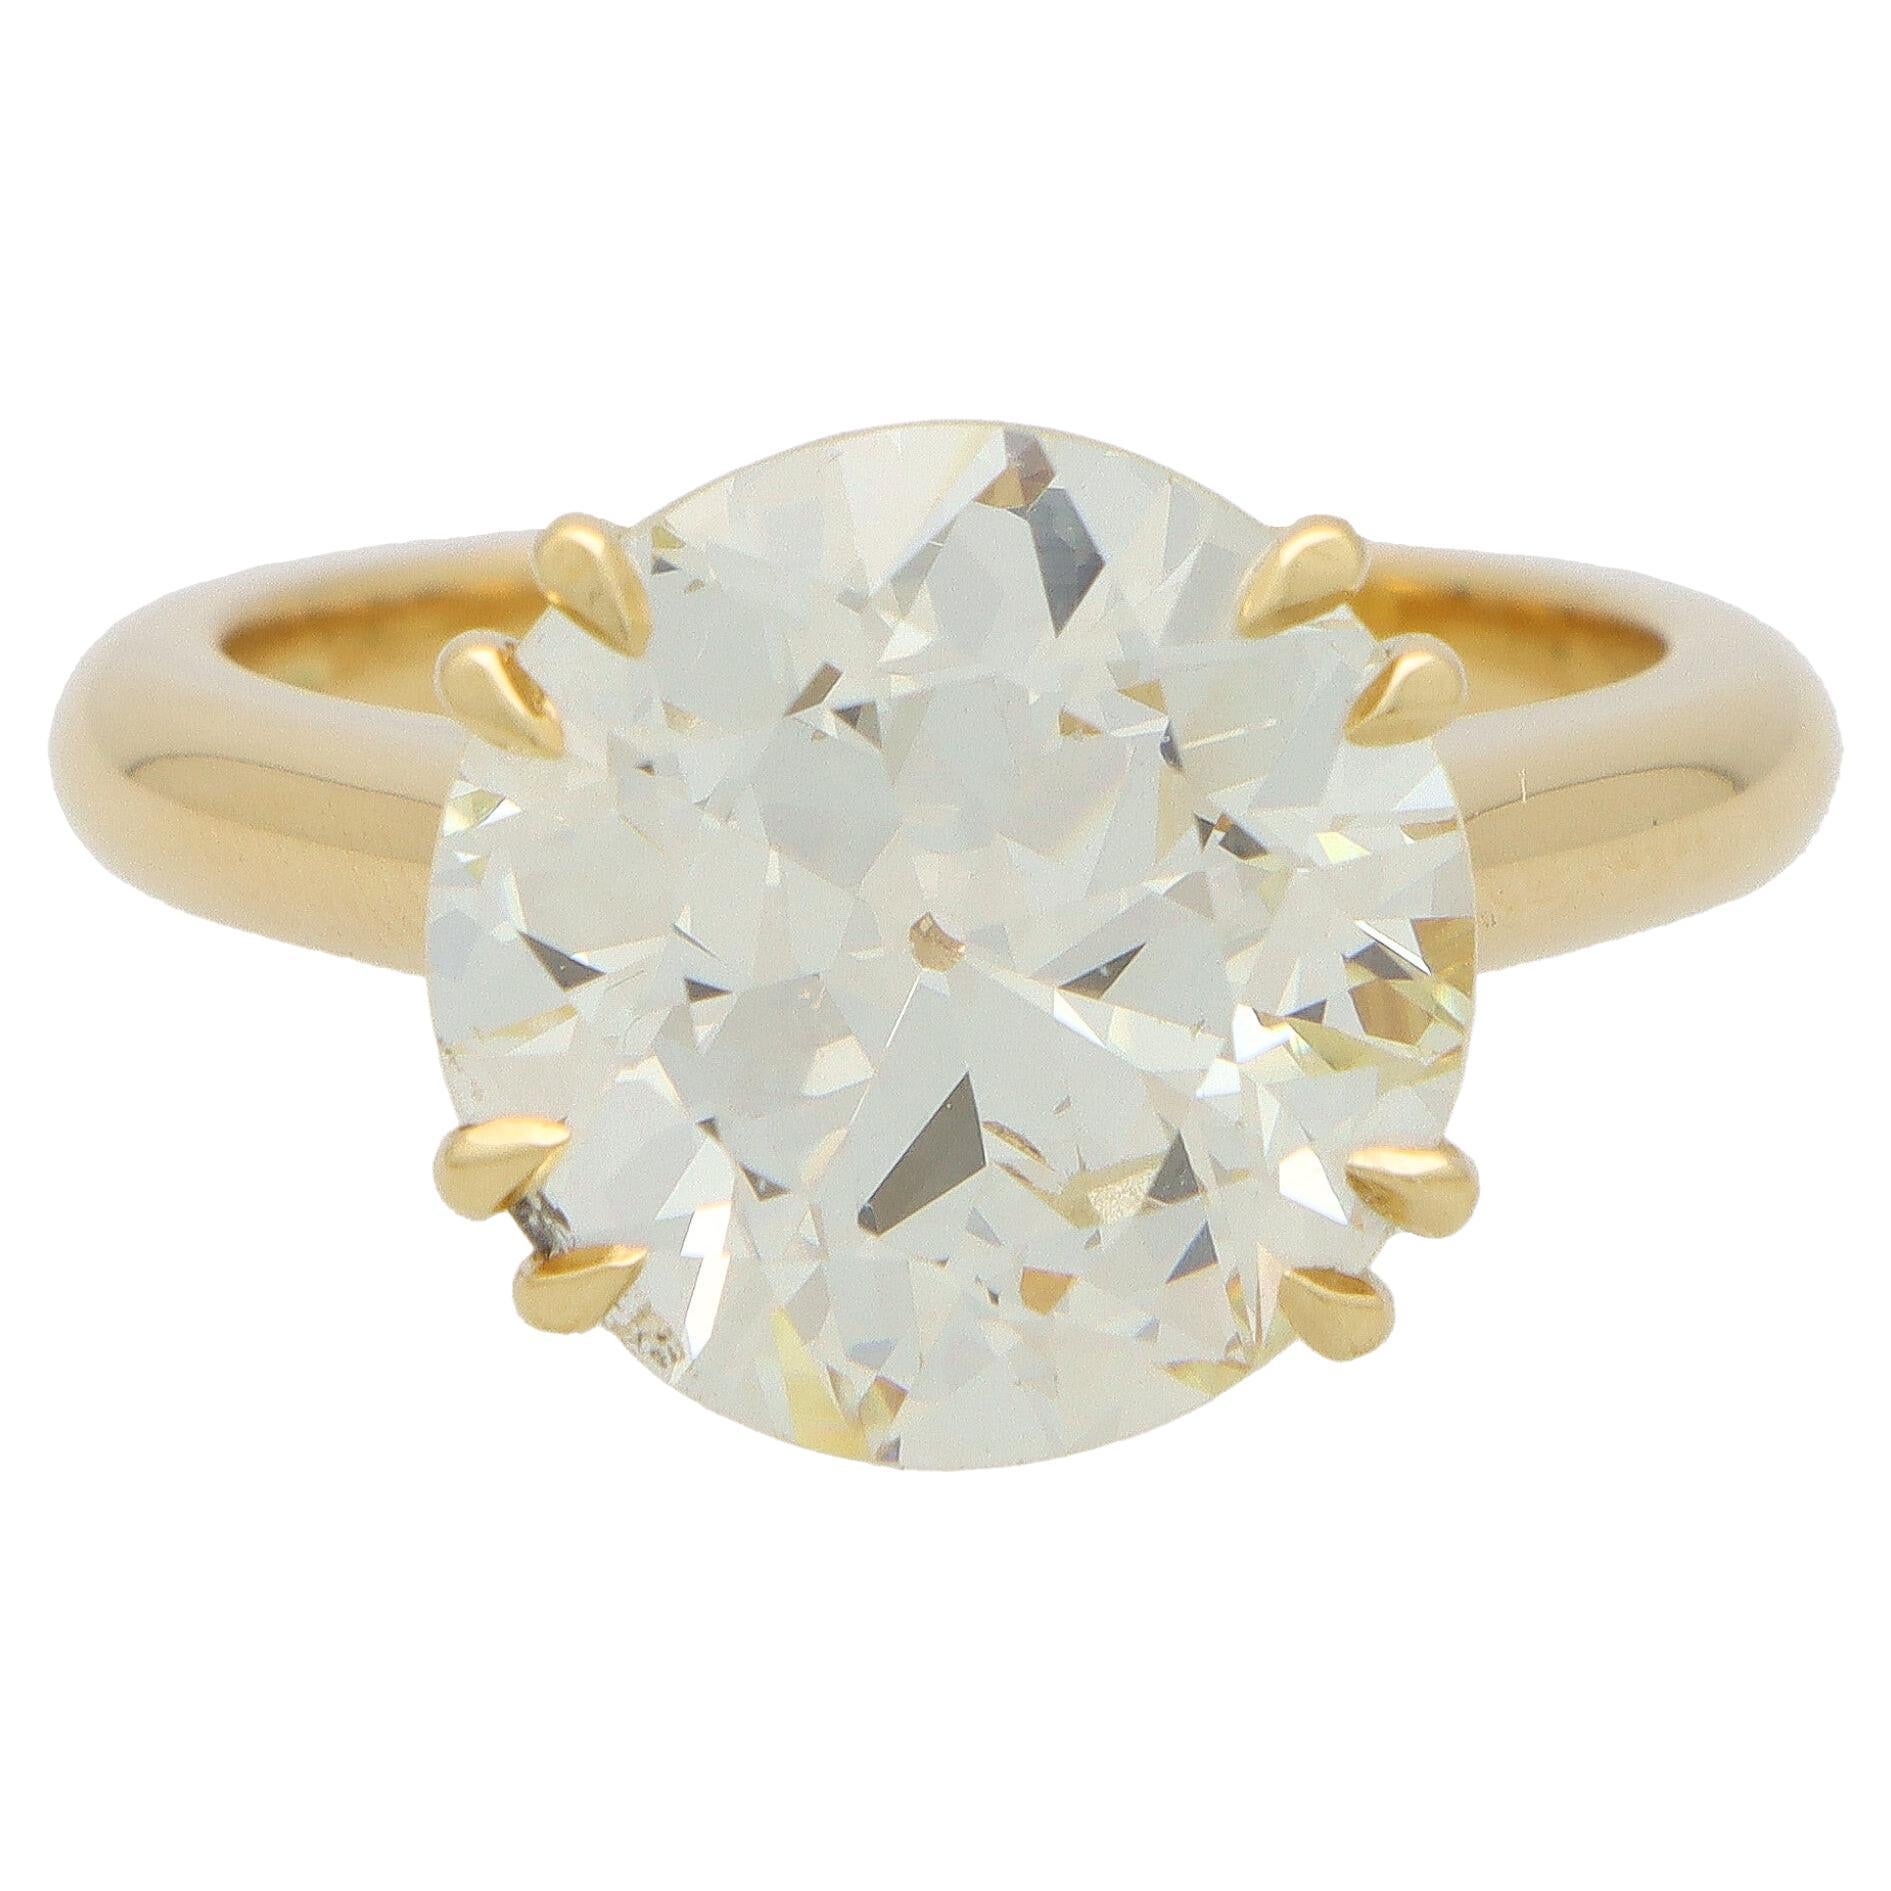 Certified 7.01 Carat Old Cut Diamond Solitaire Ring in Yellow Gold For Sale